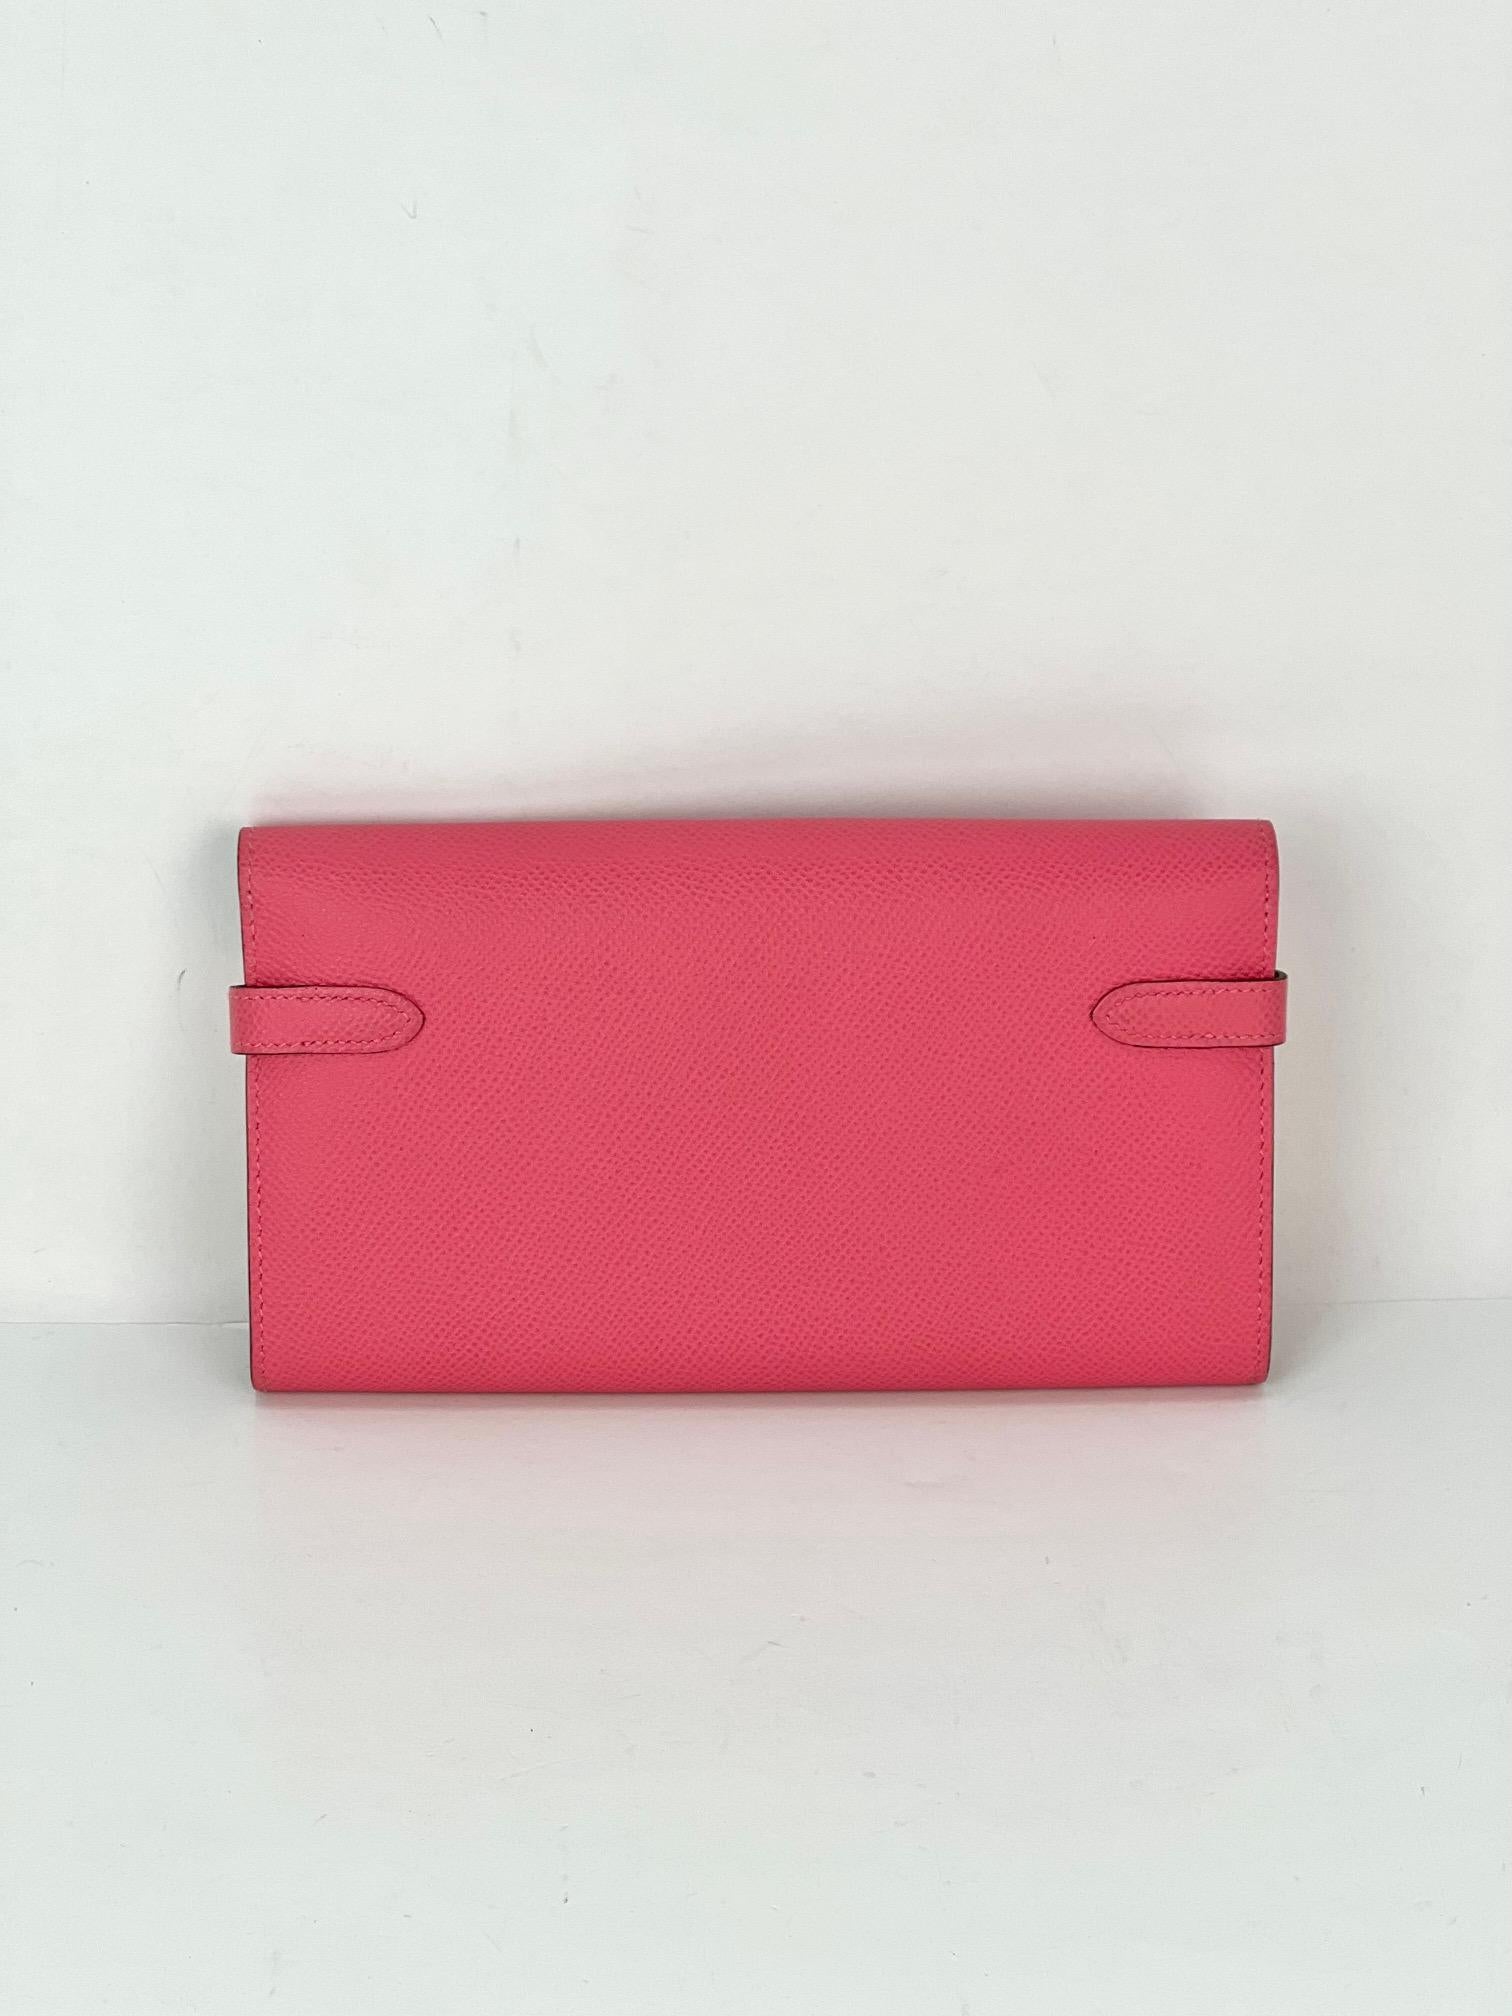 HERMES Epsom Kelly Longue Rose Azalee Wallet   In Excellent Condition For Sale In Freehold, NJ